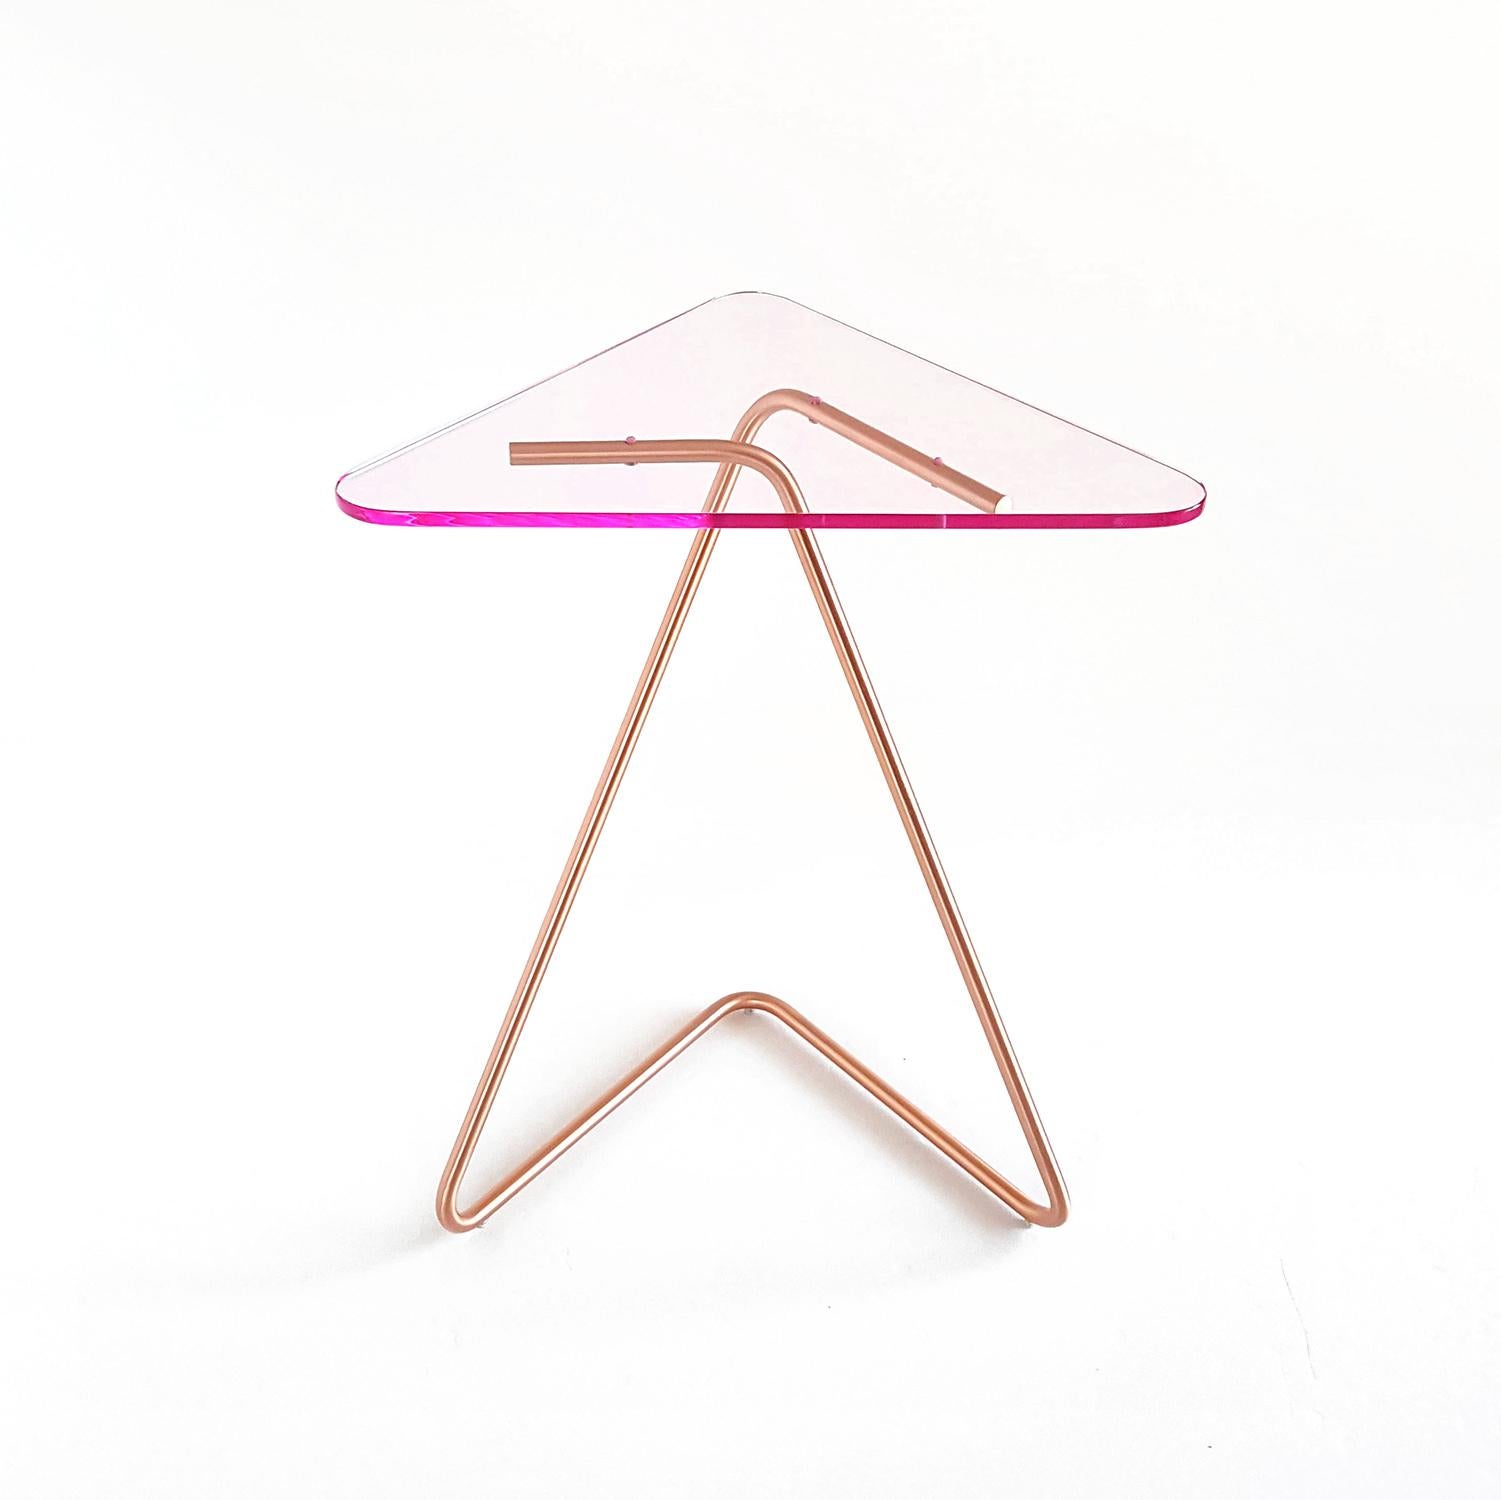 The triangle side table by Rita Kettaneh
Dimensions: The base: brushed stainless steel plated with copper
optionally plated with copper or brass
The top: Acrylic
Materials: H 49.5 x W 41 x D 9.5 cm
Weight: 2.6 Kg

Colors and